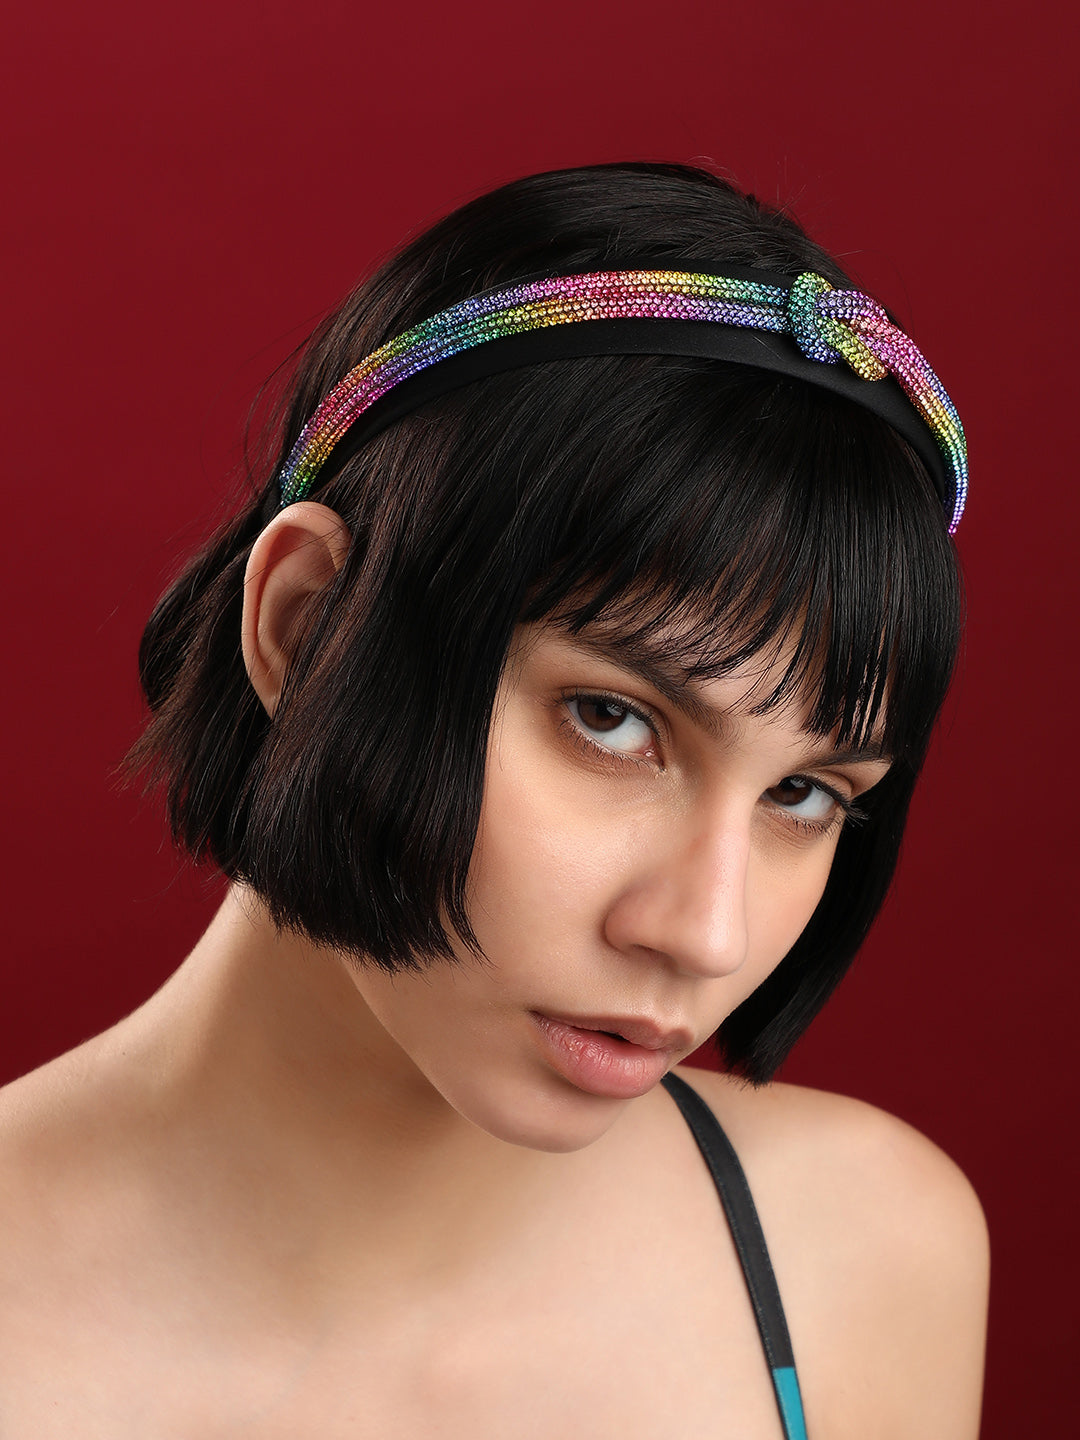 Exquisite Adornment: Embracing Style With An Embellished Hairband